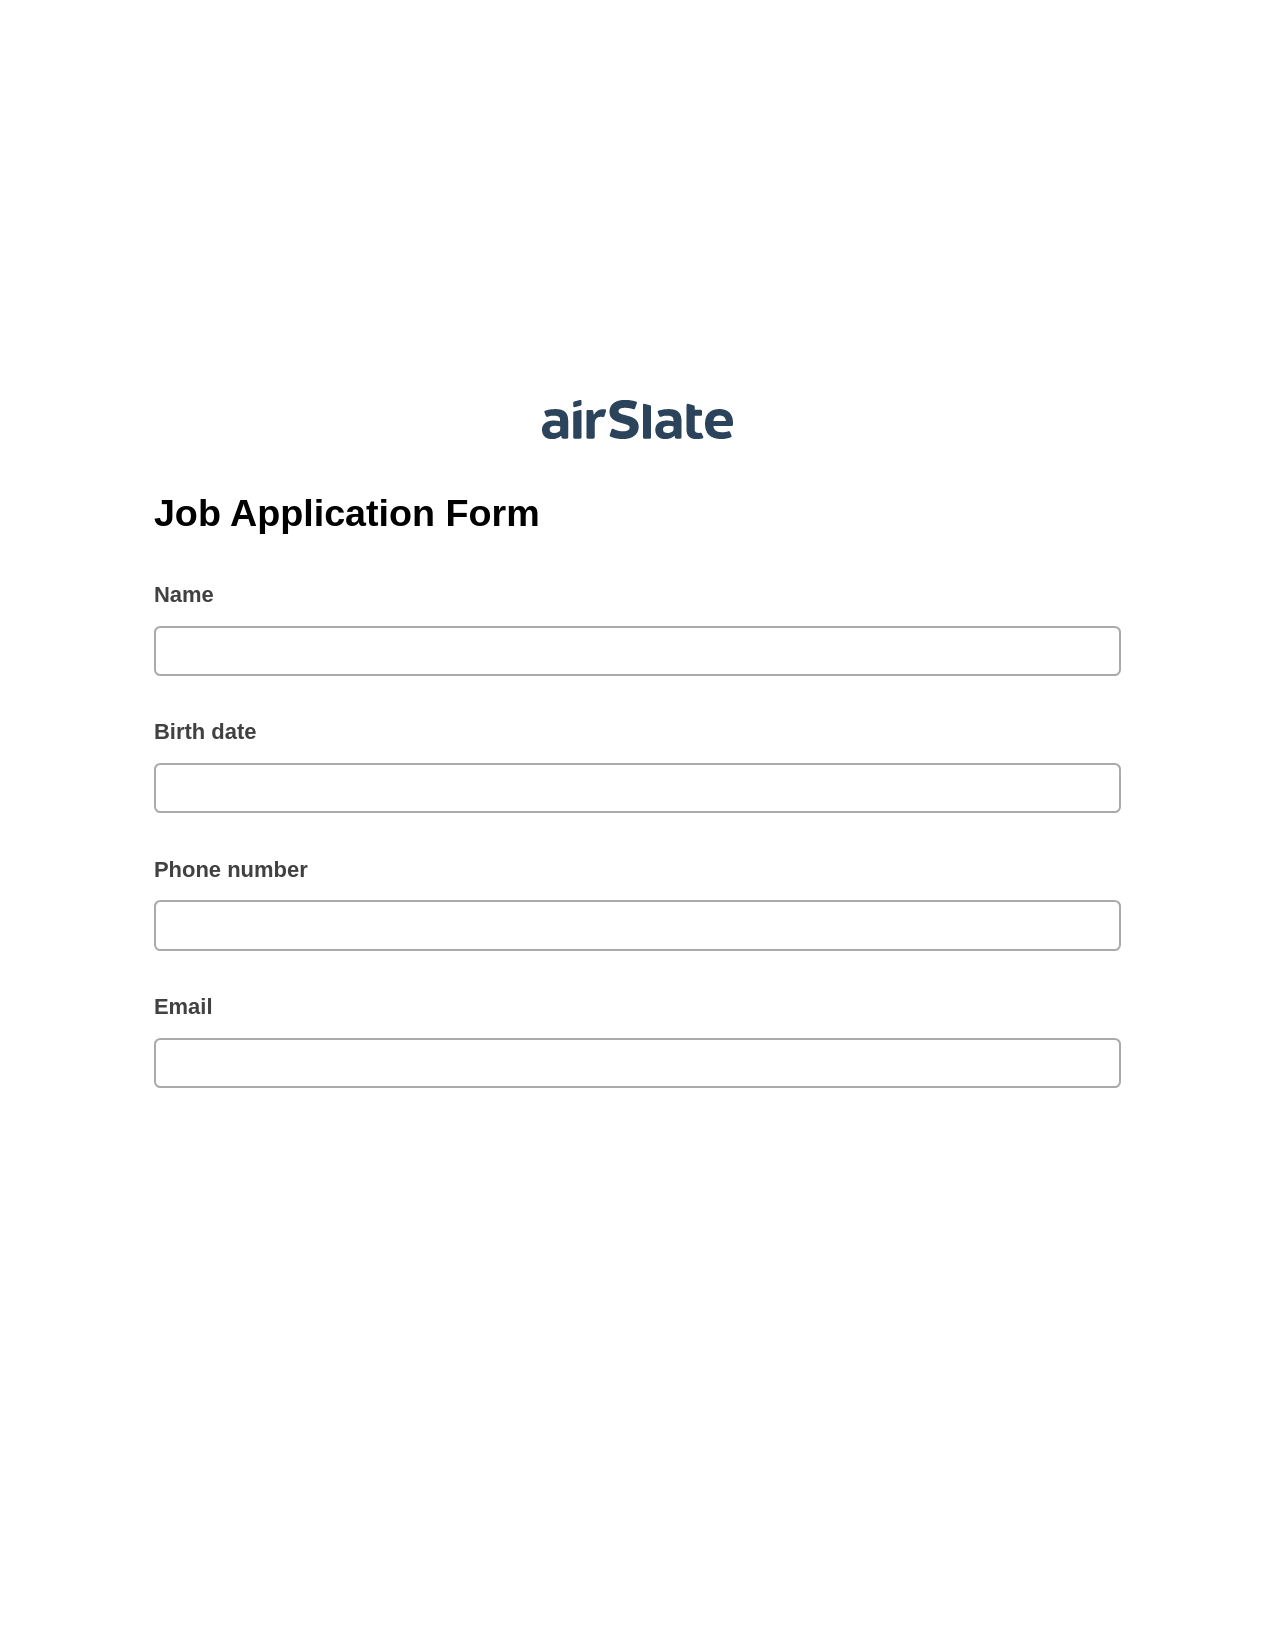 Job Application Form Pre-fill from MySQL Dropdown Options Bot, Send a Slate to Salesforce Contact Bot, Export to Salesforce Bot